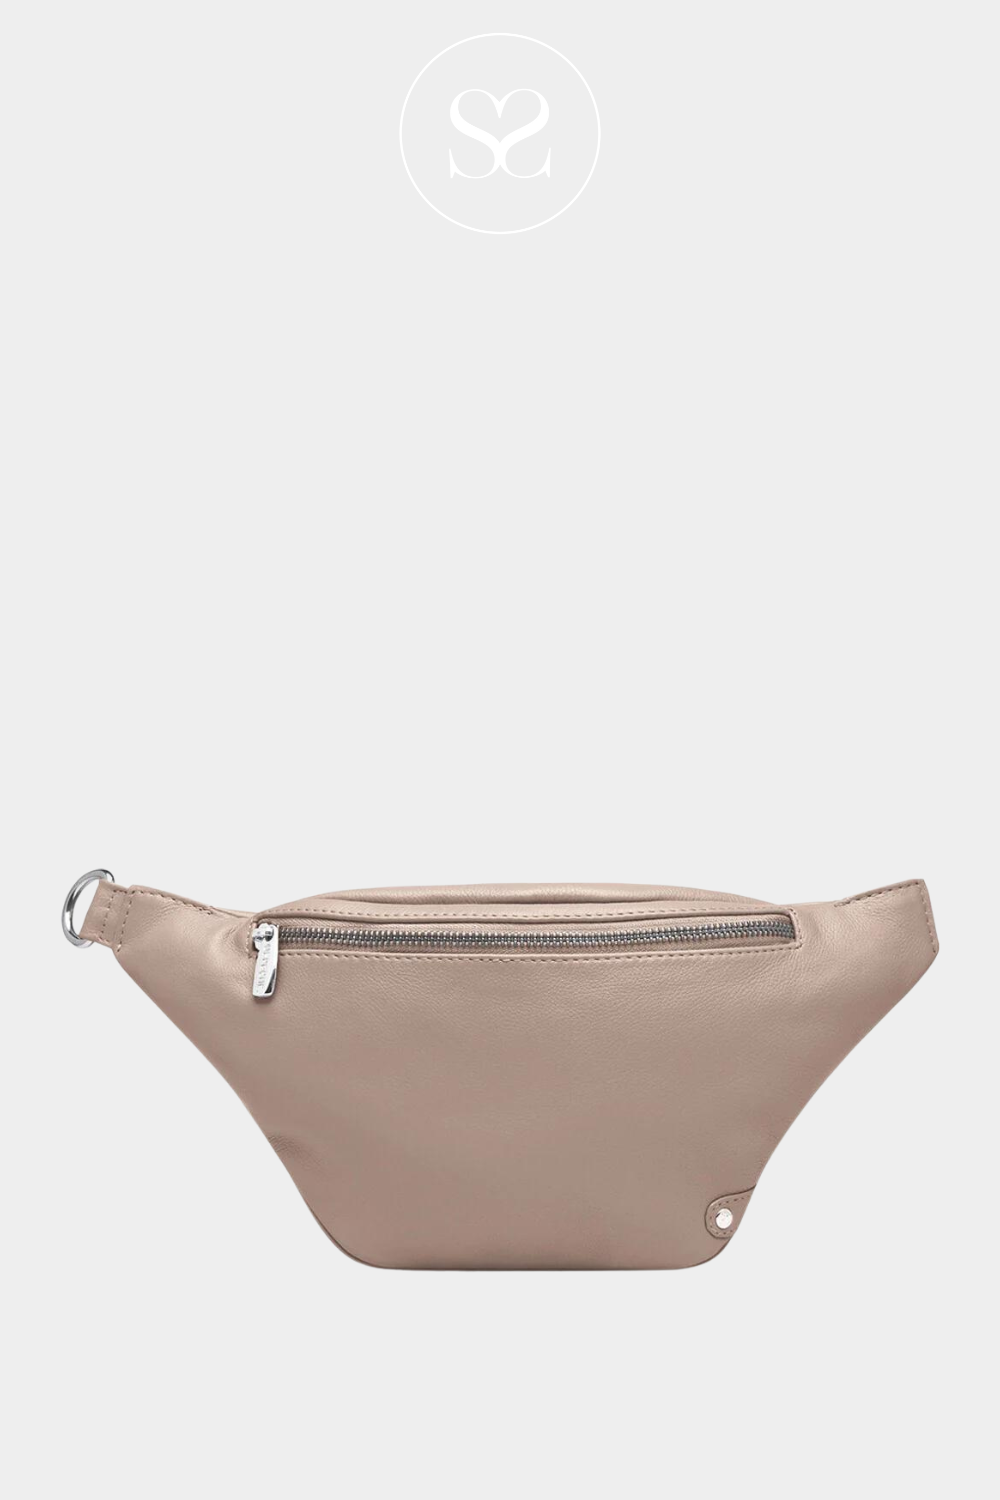 Depeche taupe leather crossbody bumbag